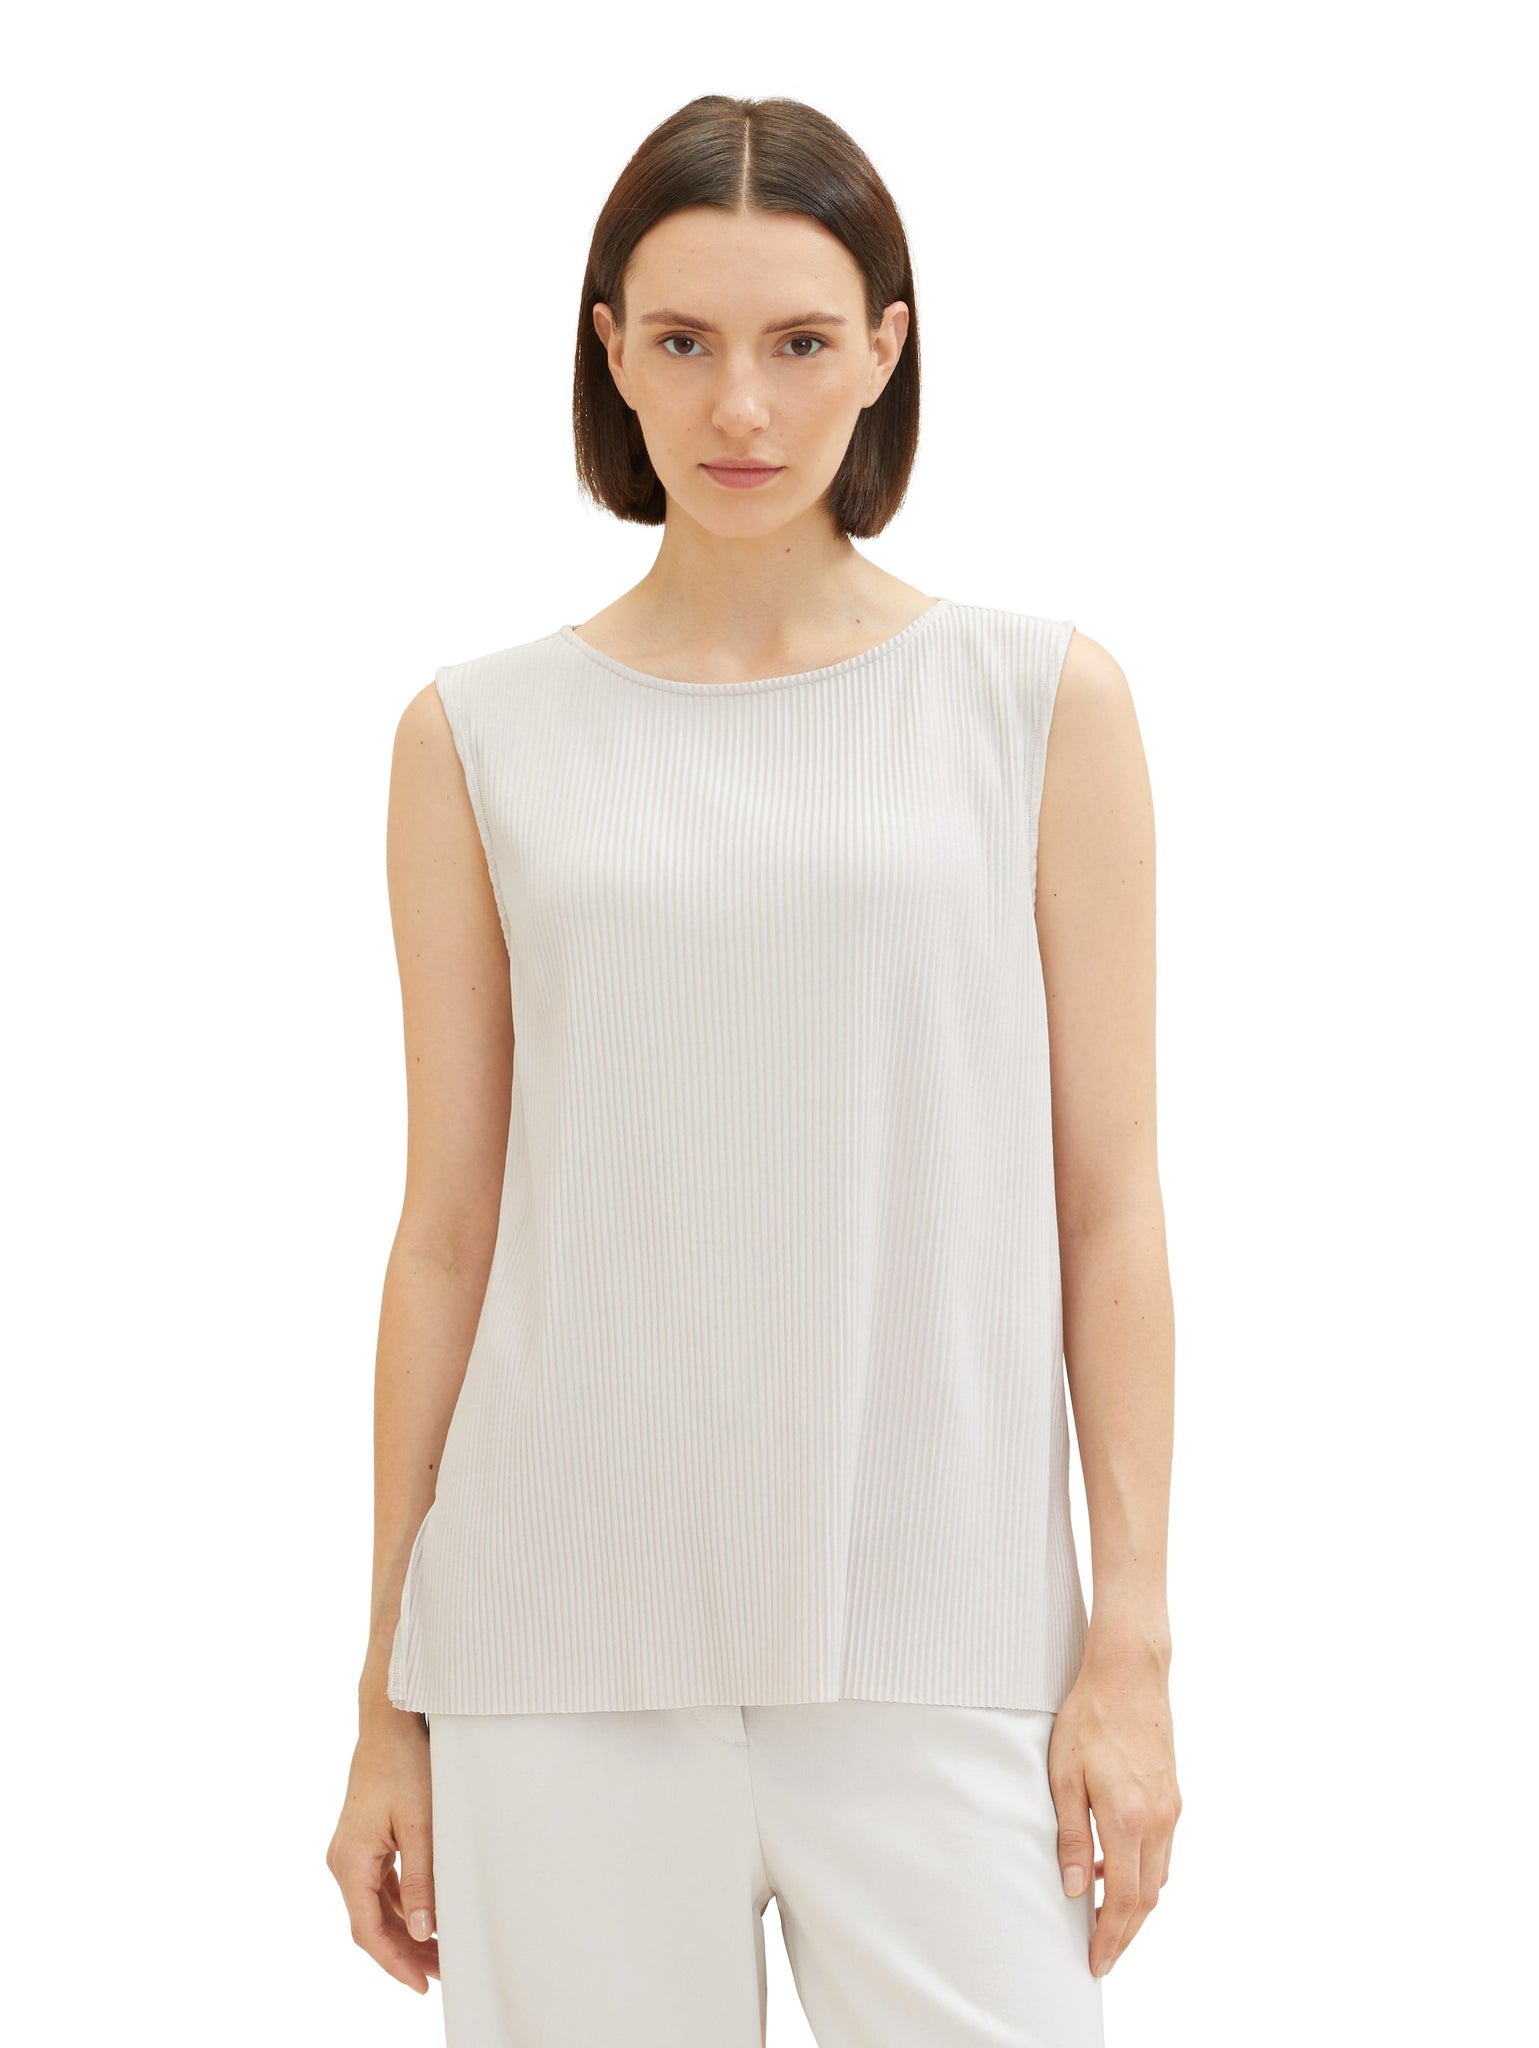 Tom tailor 1038074 off white ribbed sleeveless top